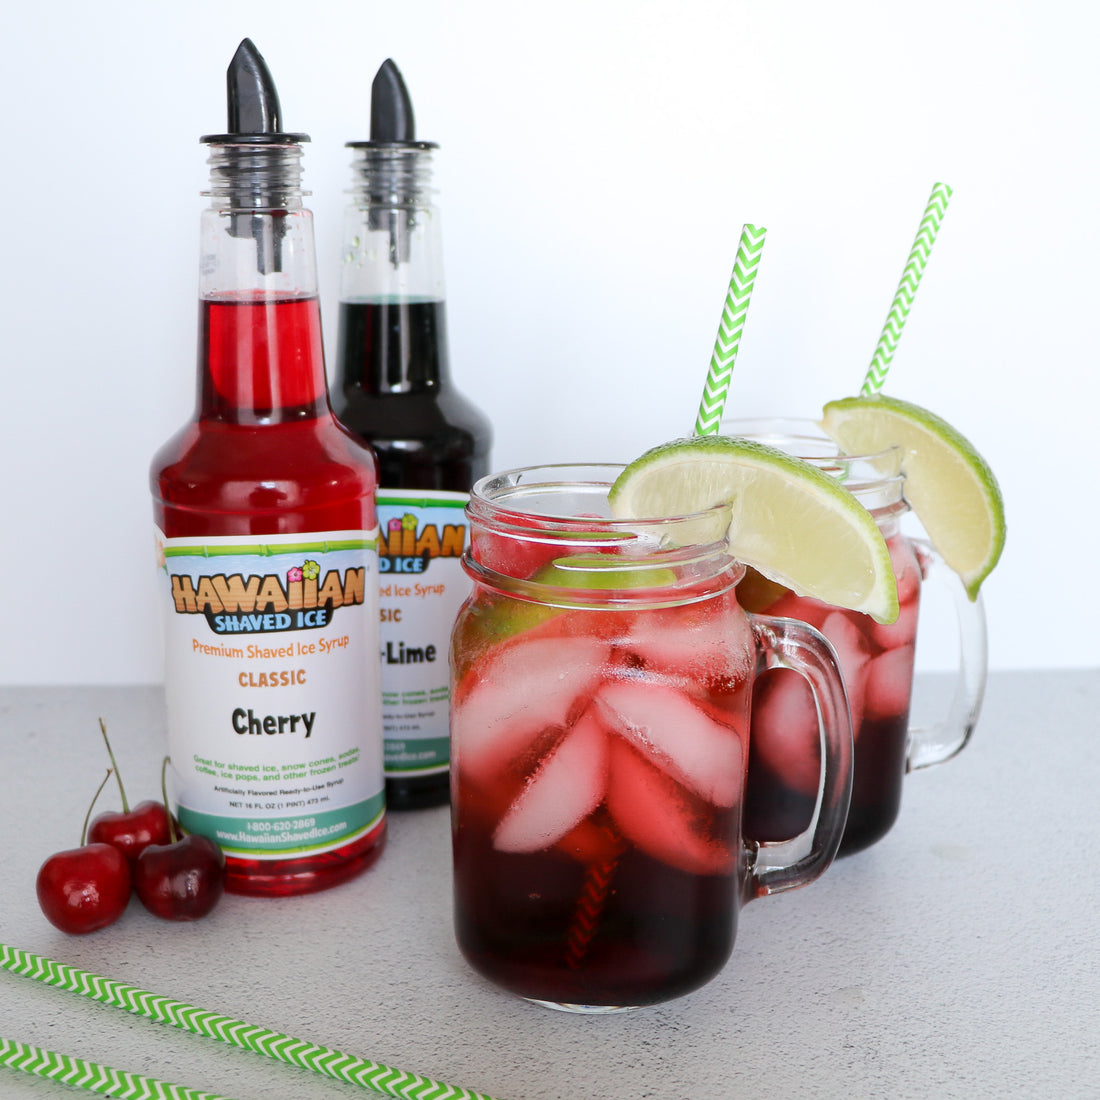 Hawaiian Shaved Ice® Cherry Limeade sparkling beverage